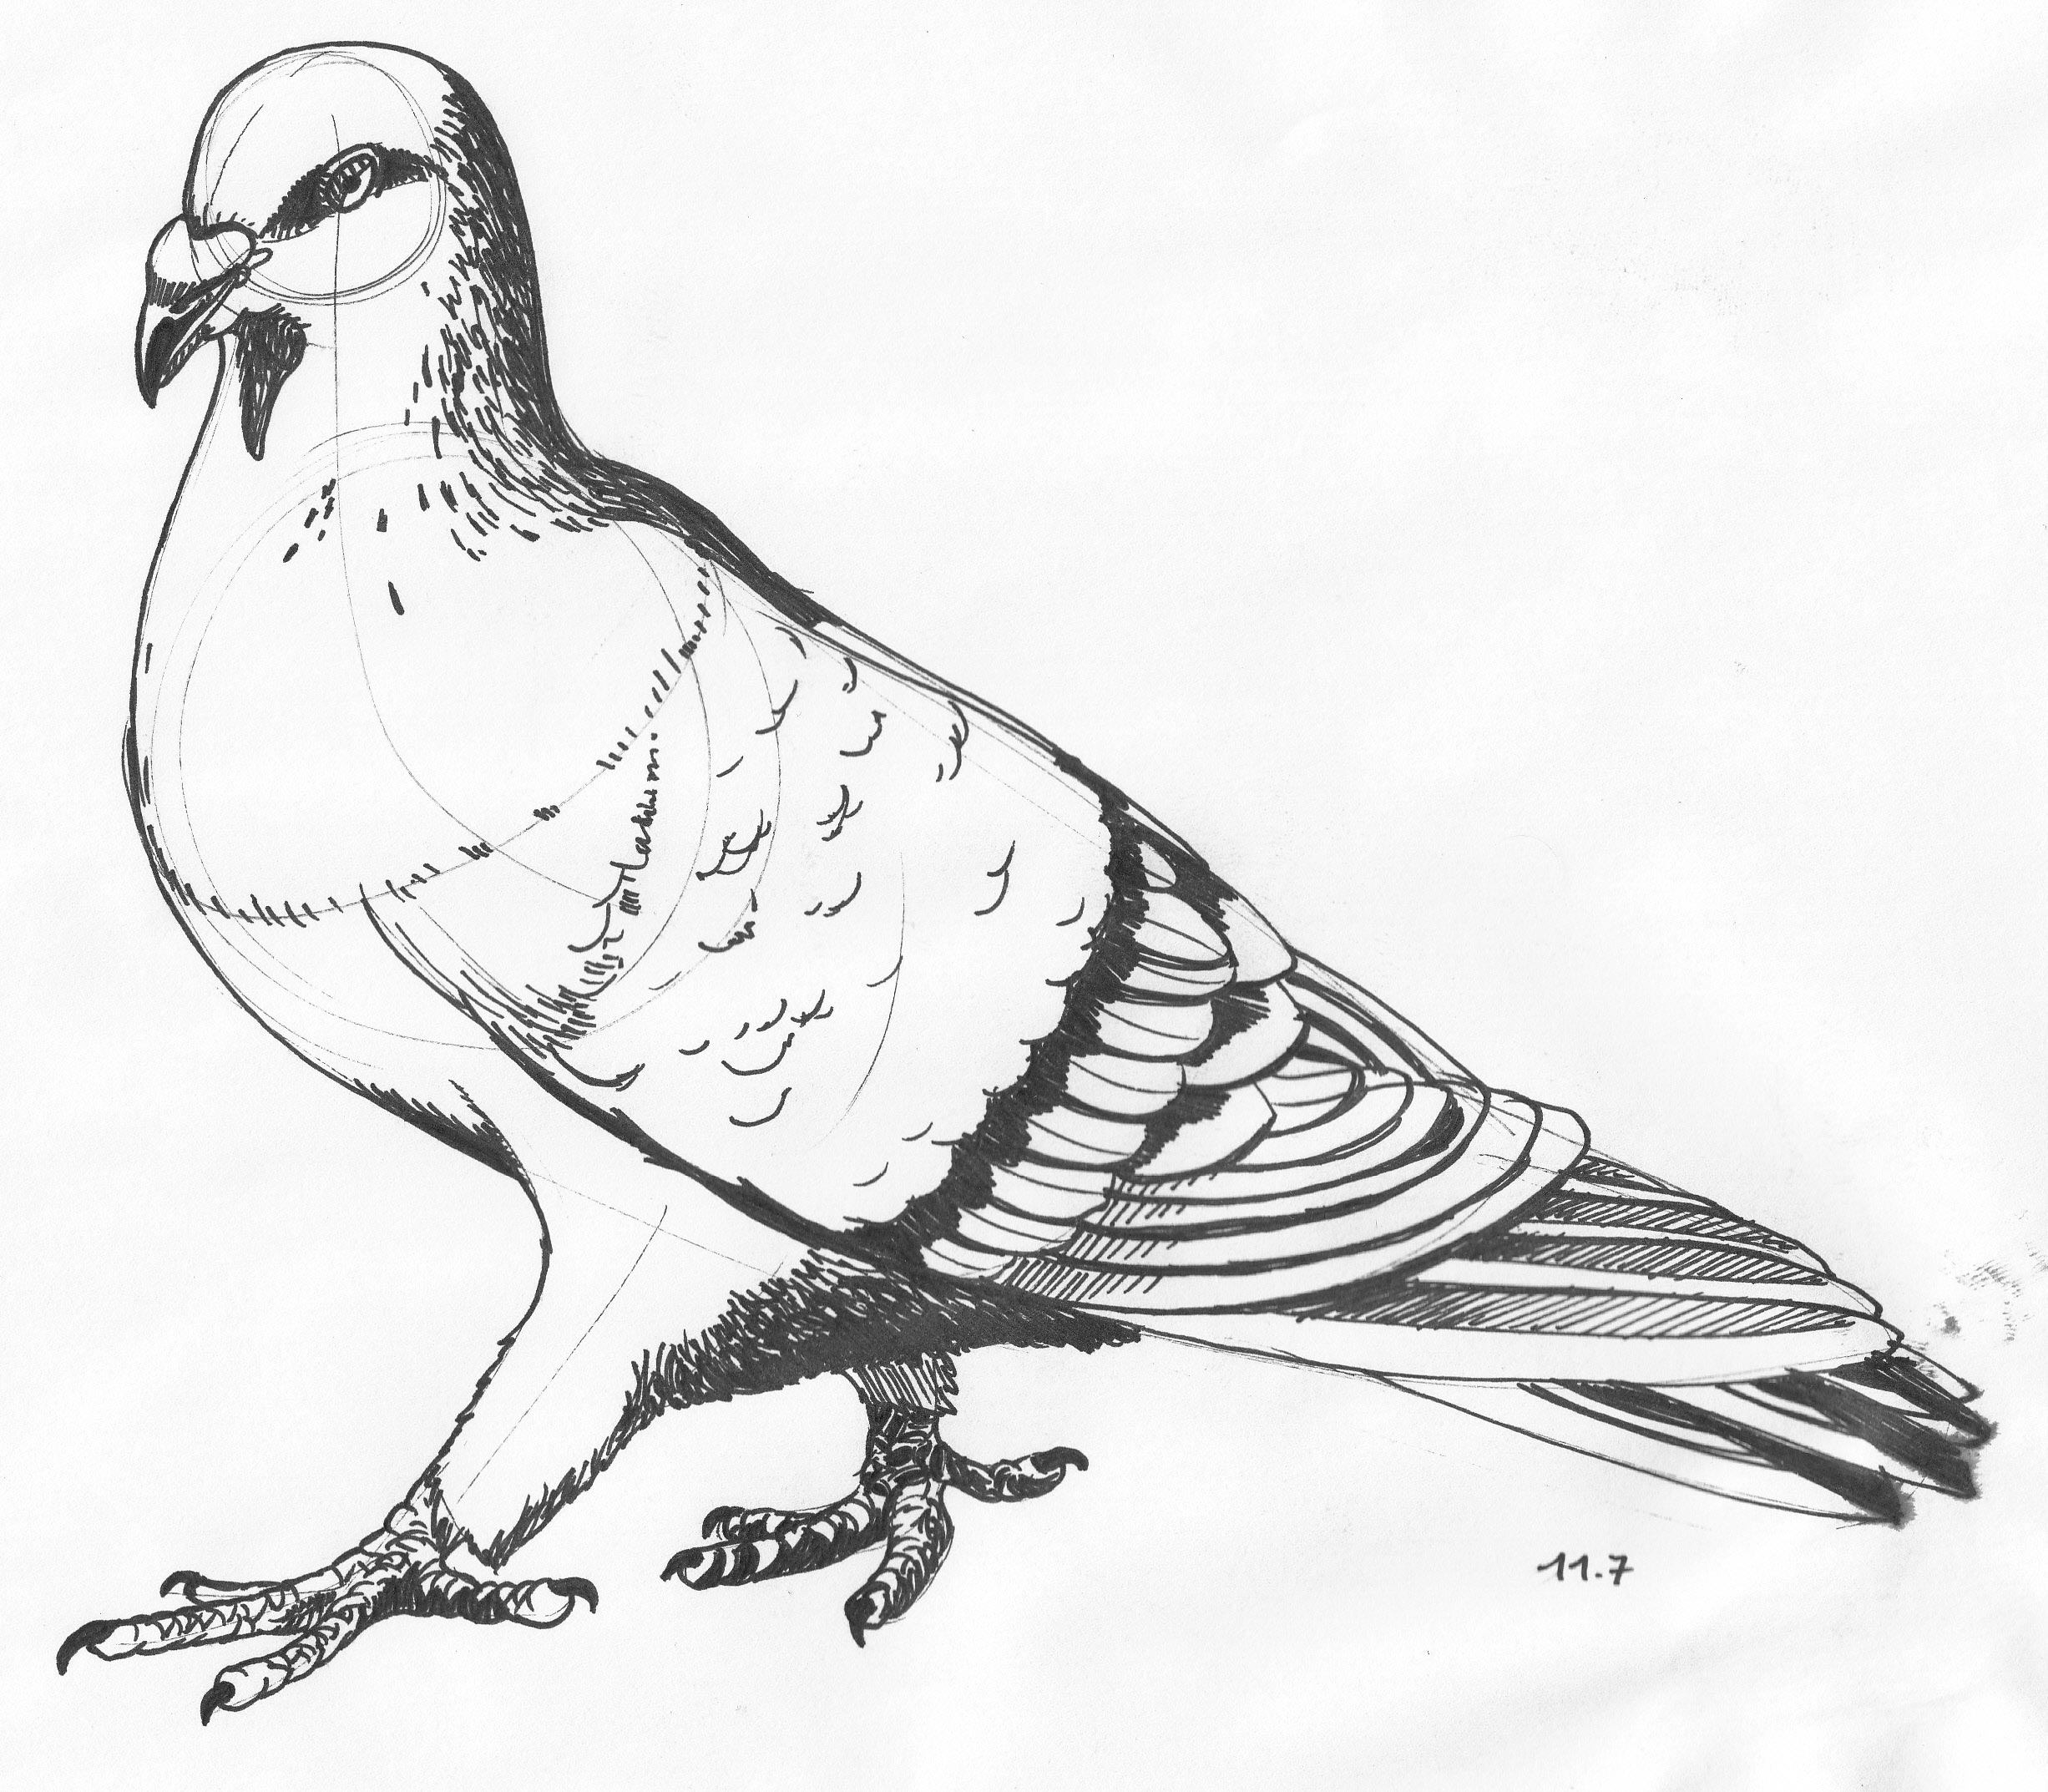 Pigeon Drawing & Sketches For Kids - Kids Art & Craft